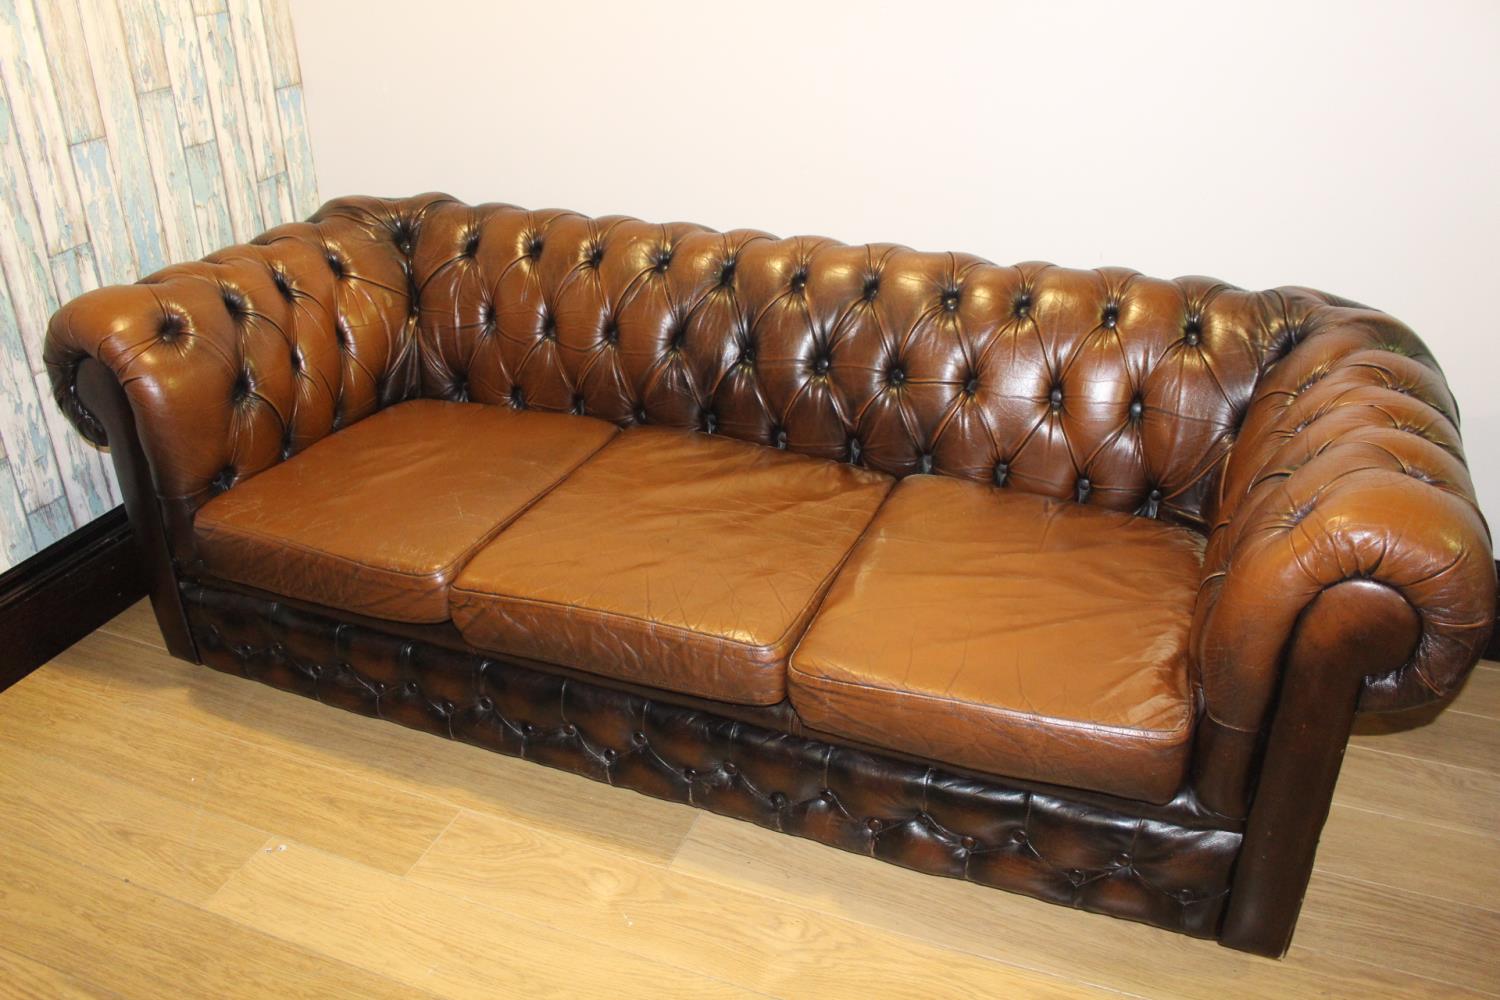 Excellent quality leather chesterfield three piece deep buttoned upholstered suite - Image 3 of 4